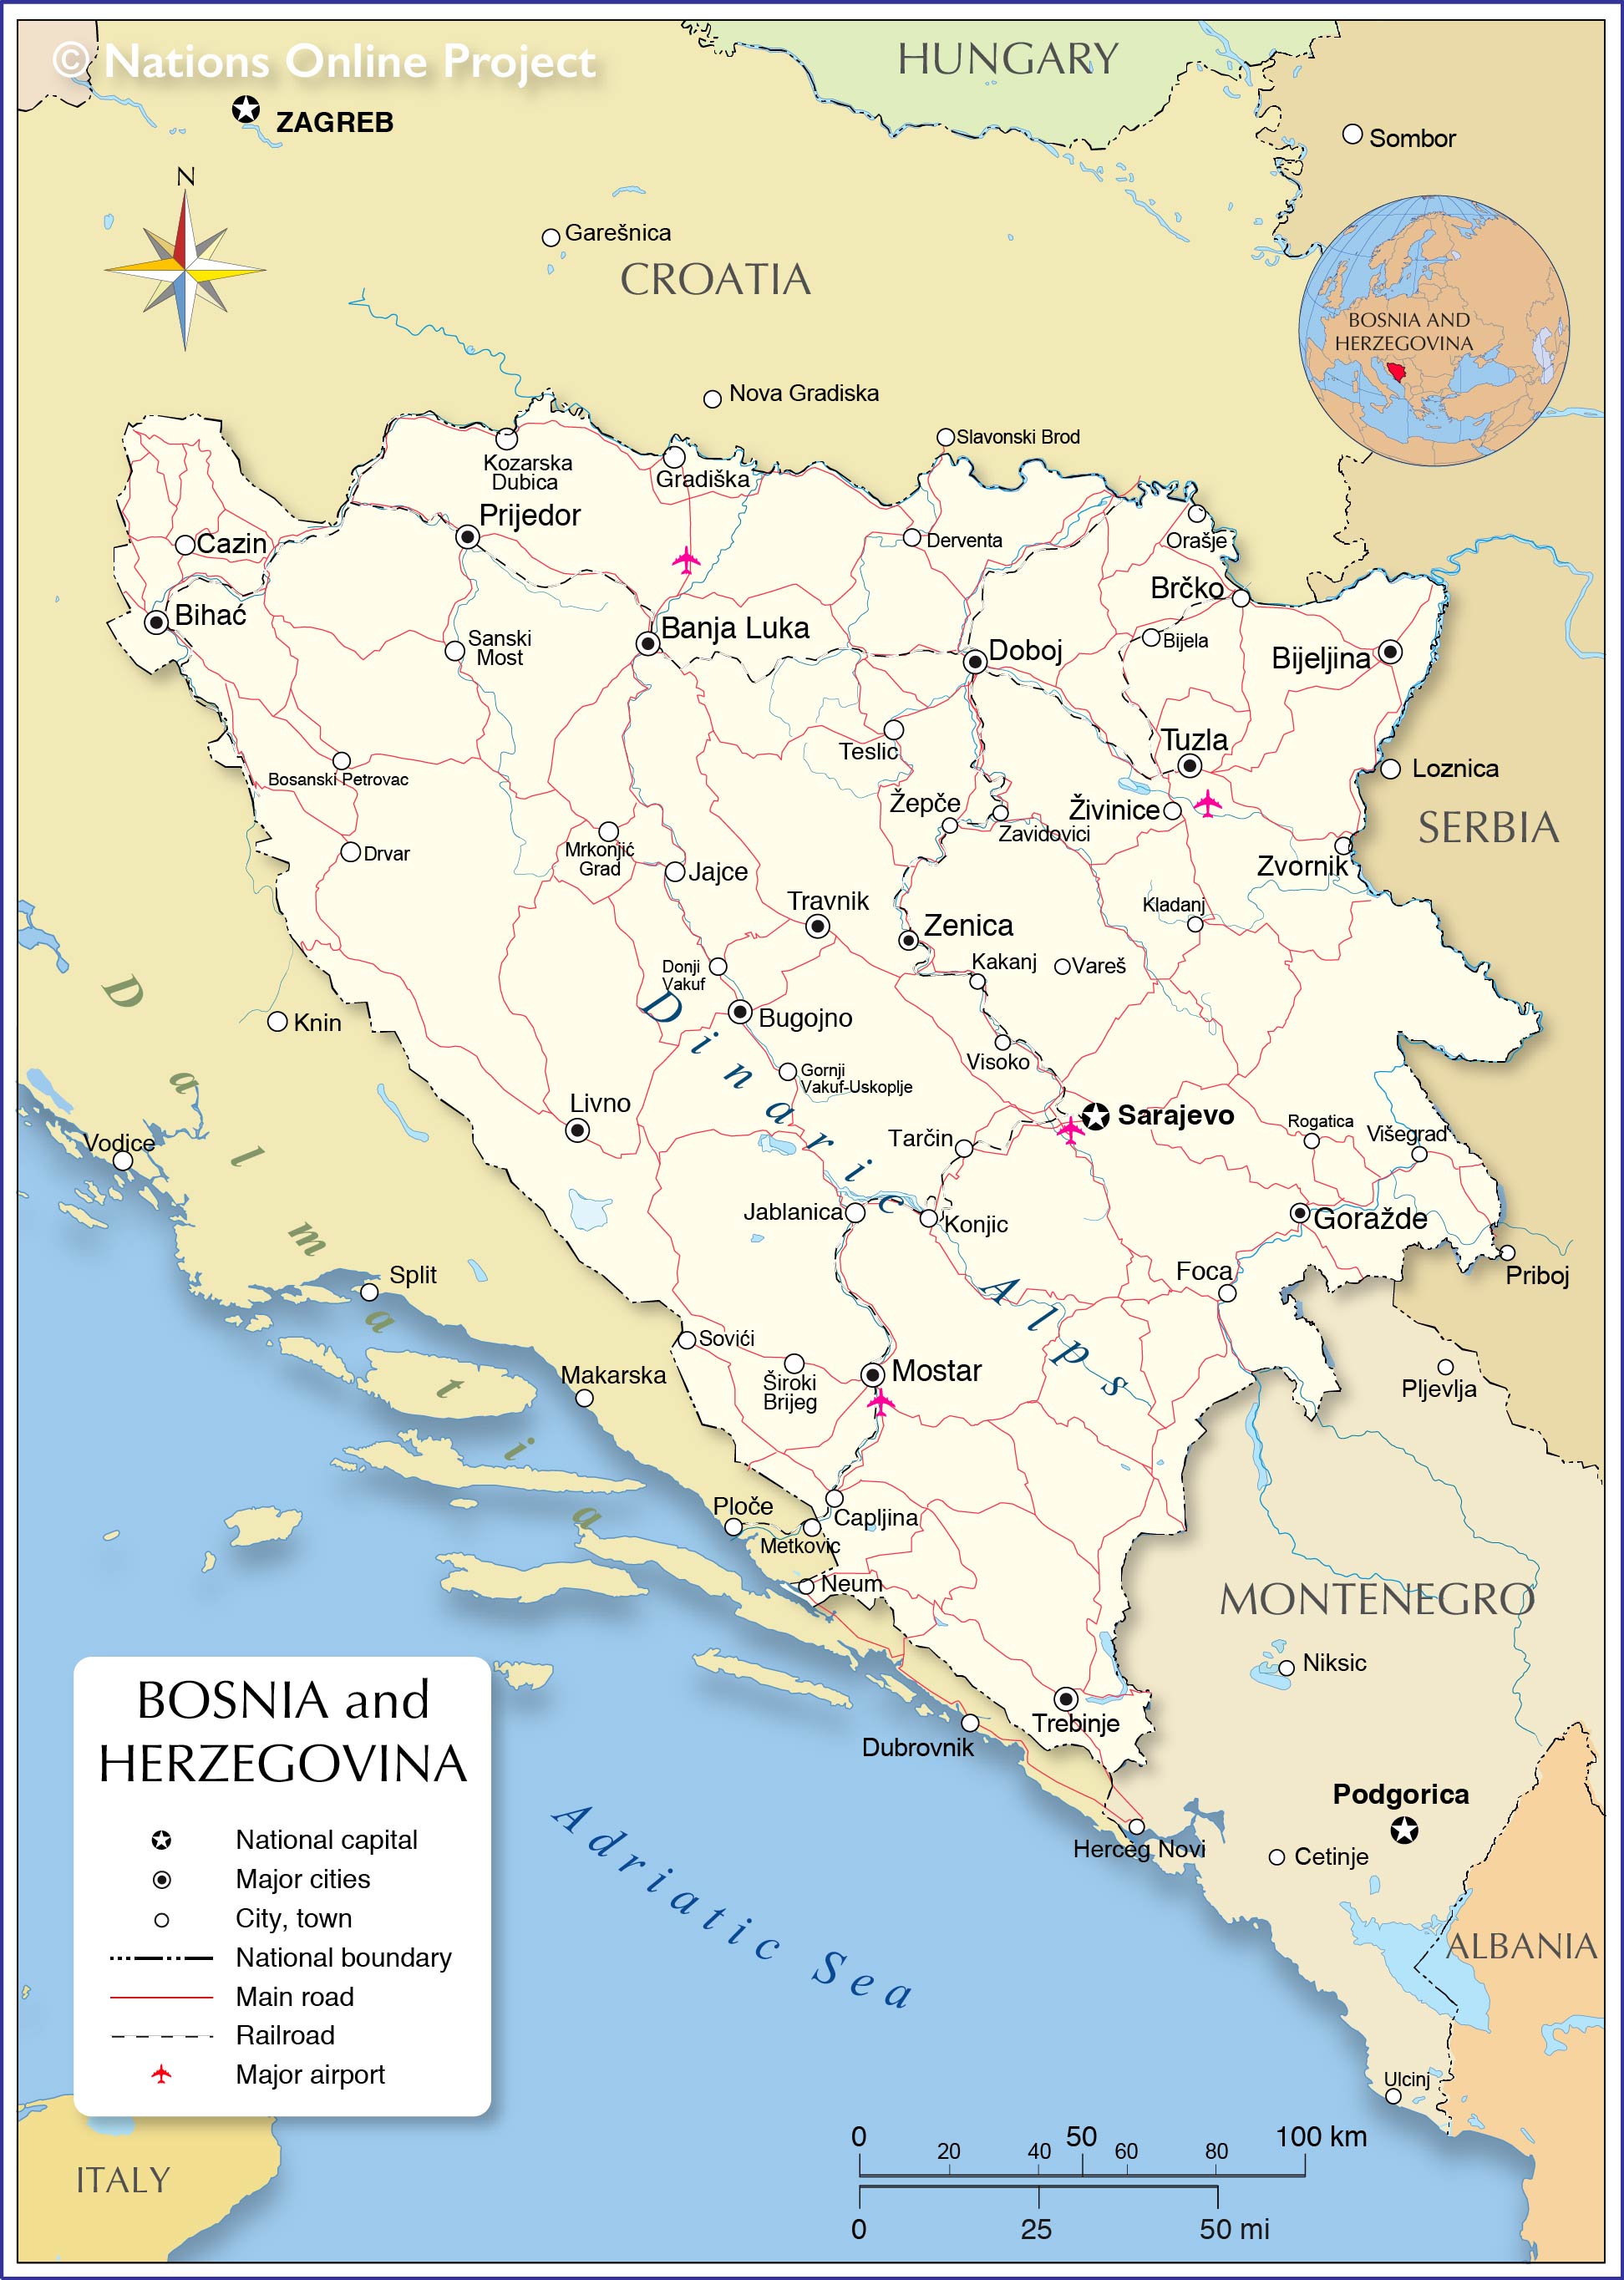 where is bosnia located on the world map Political Map Of Bosnia And Herzegovina Nations Online Project where is bosnia located on the world map